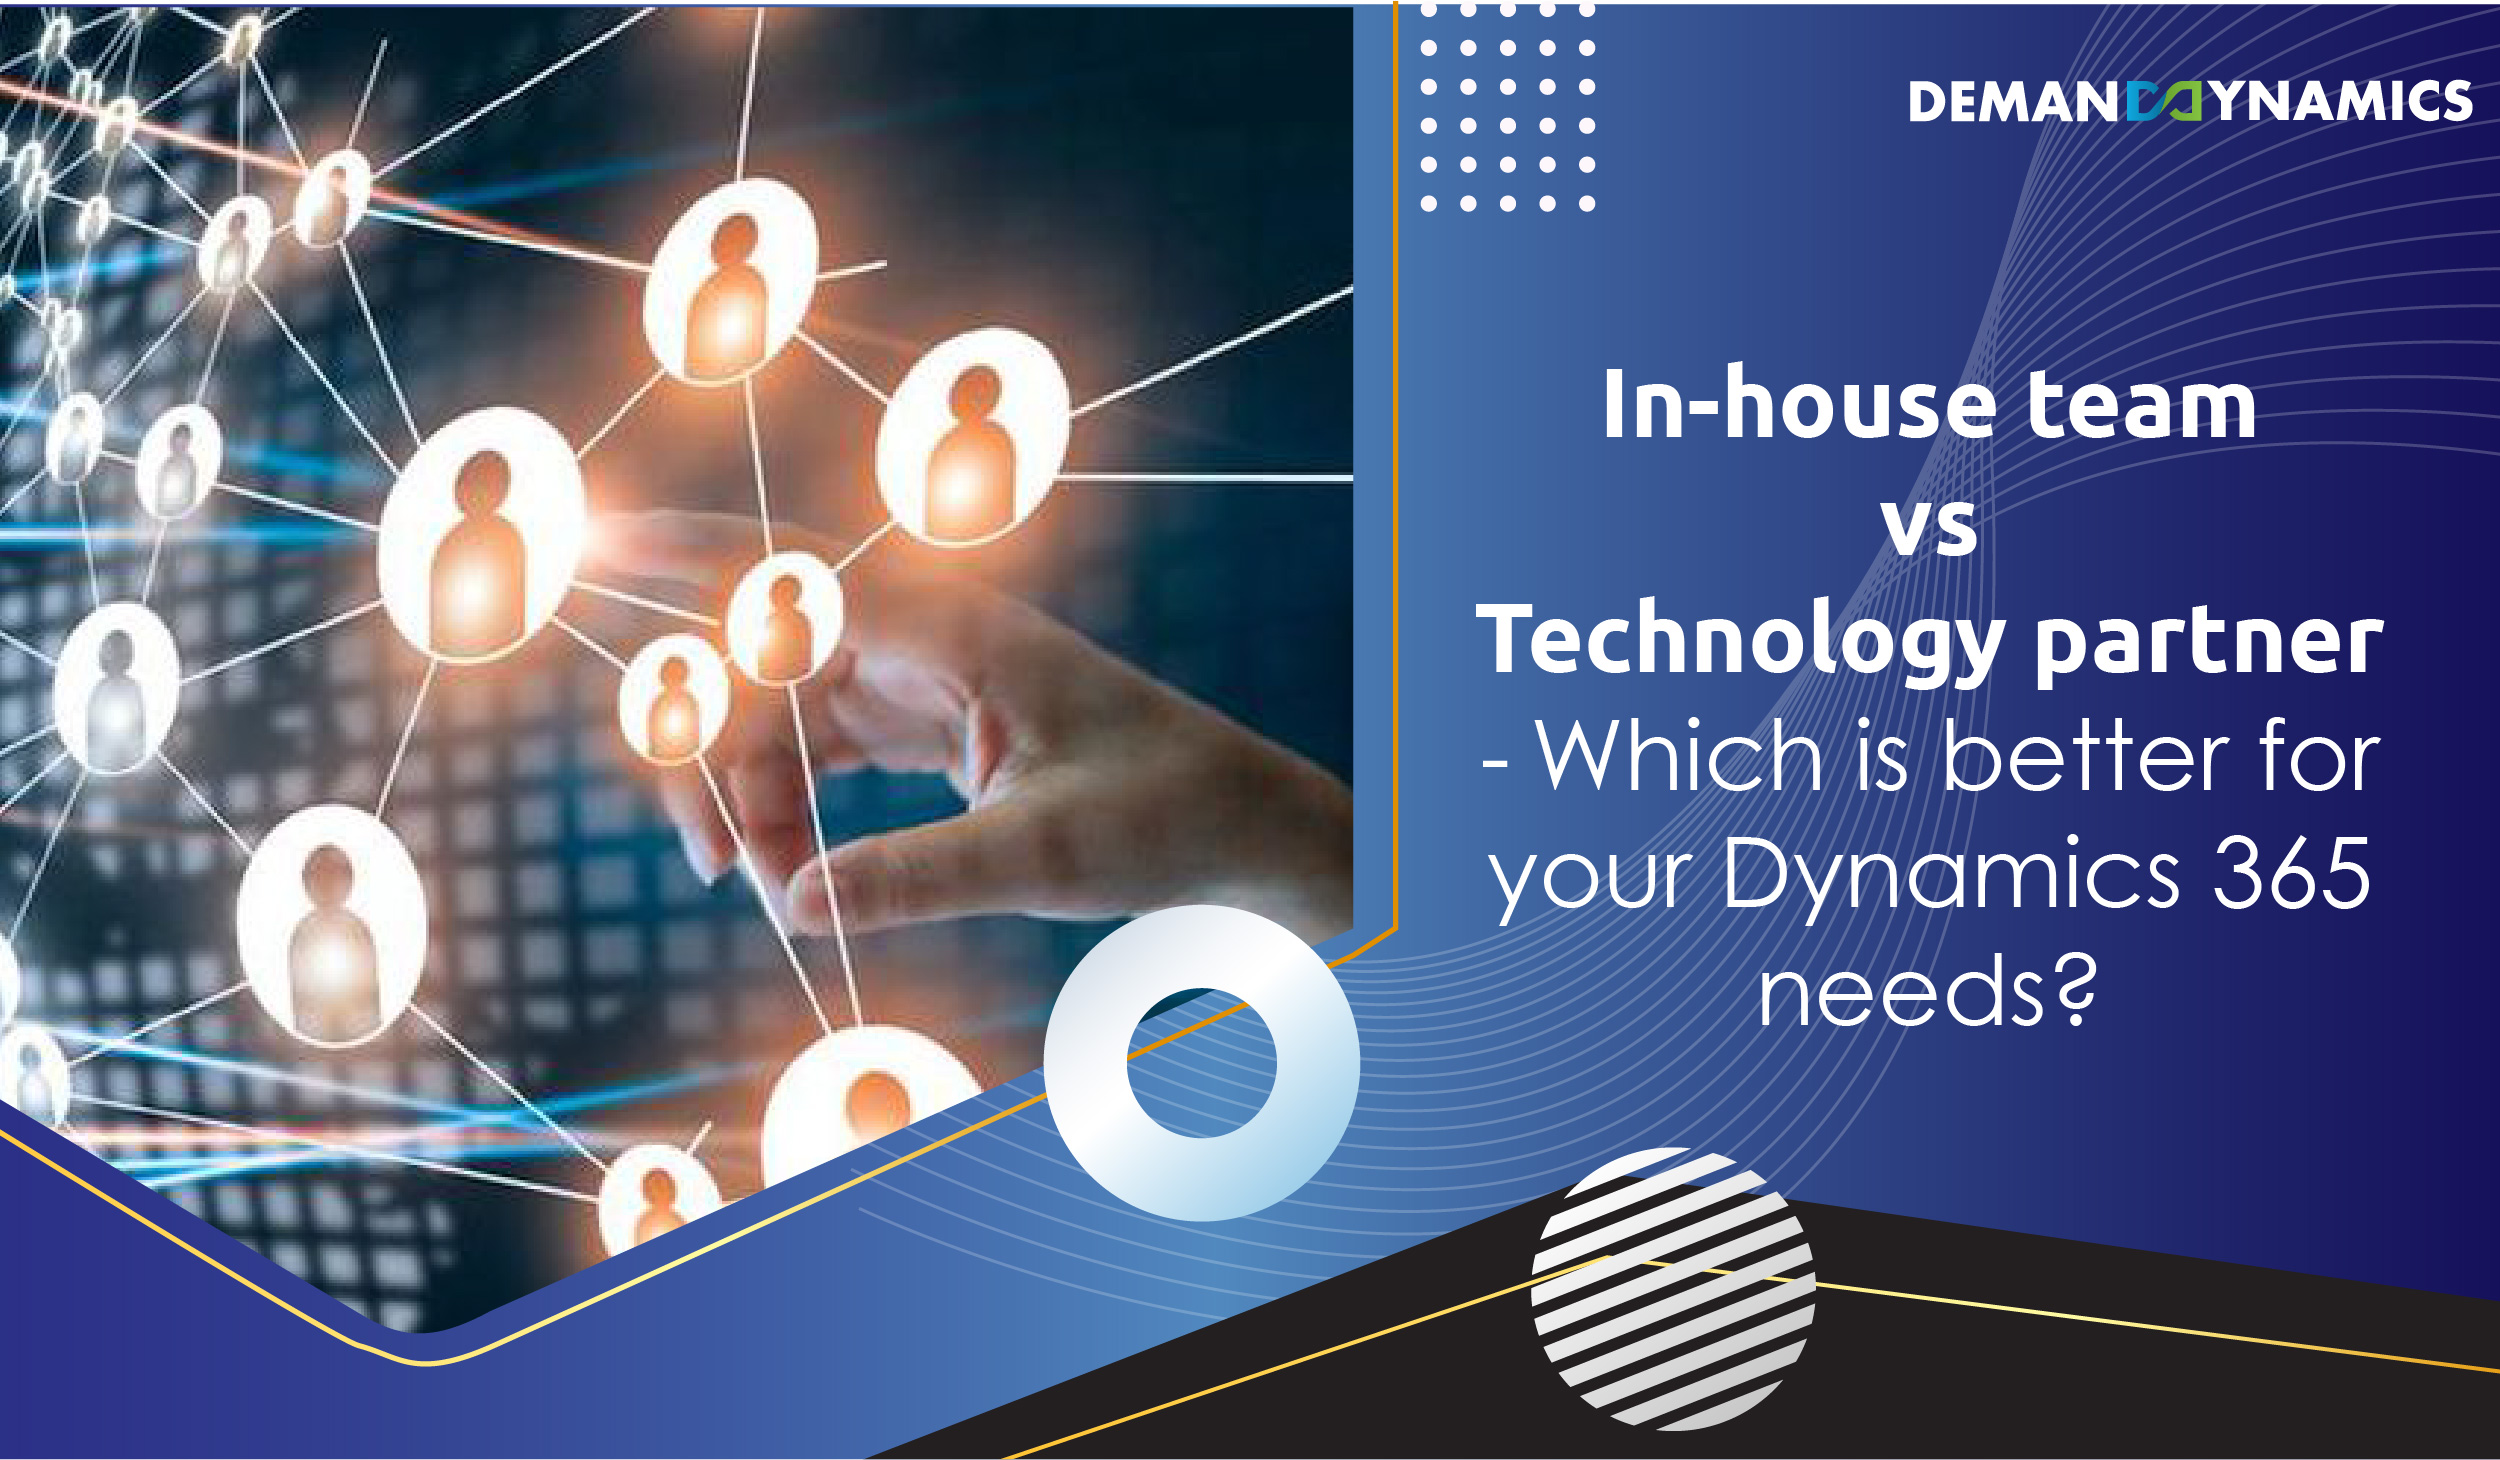 In-house team vs. Technology partner – Which is better for your Dynamics 365 needs?